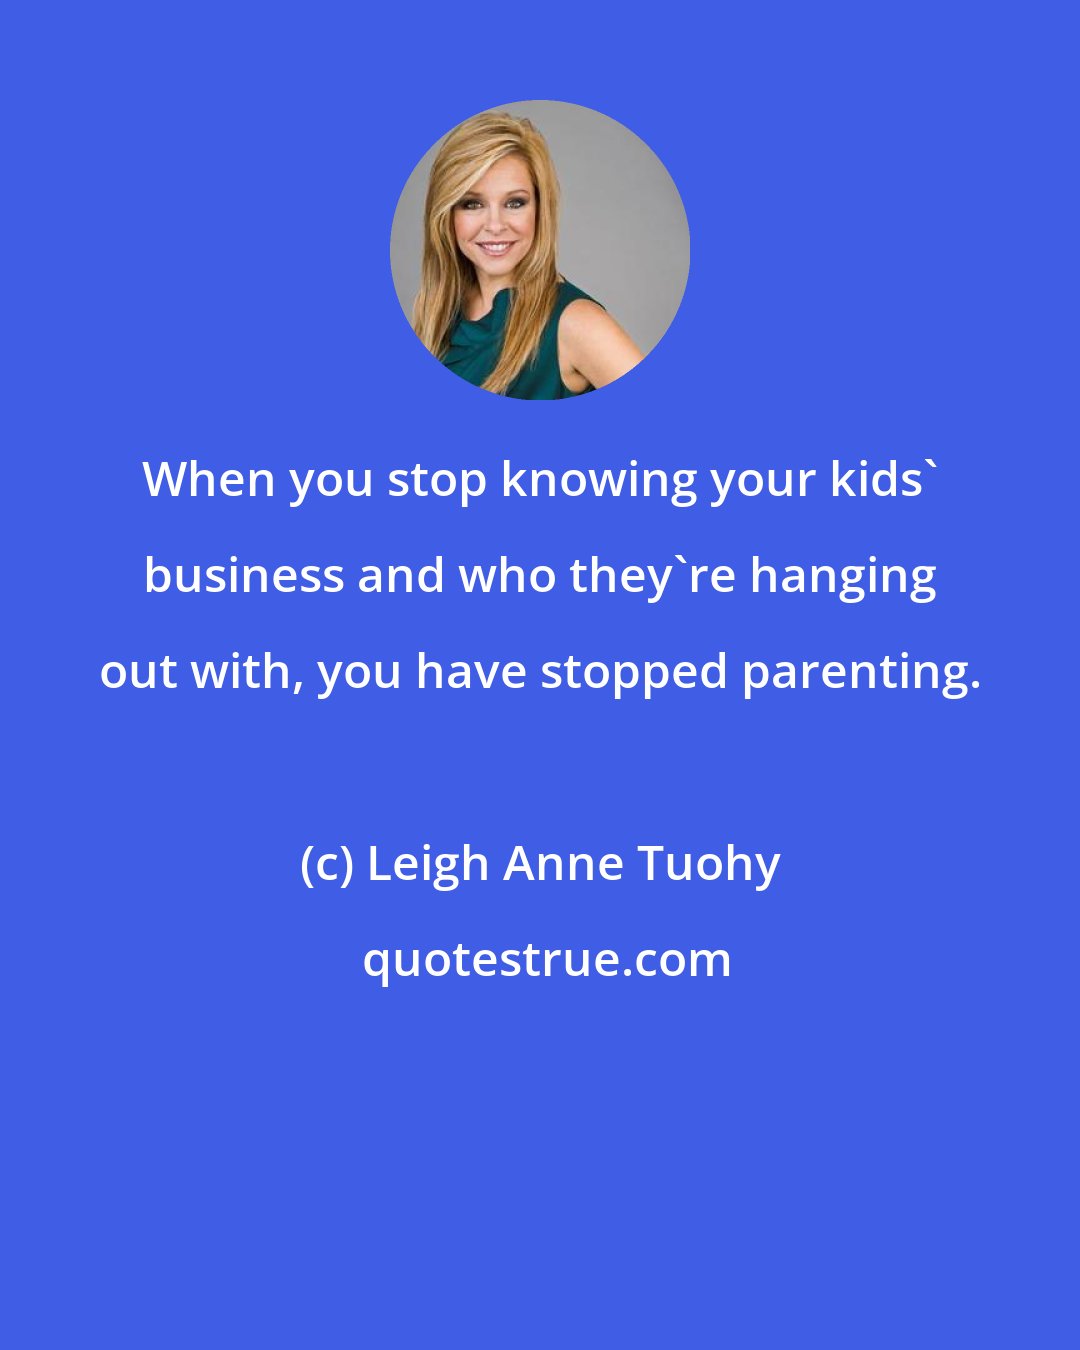 Leigh Anne Tuohy: When you stop knowing your kids' business and who they're hanging out with, you have stopped parenting.